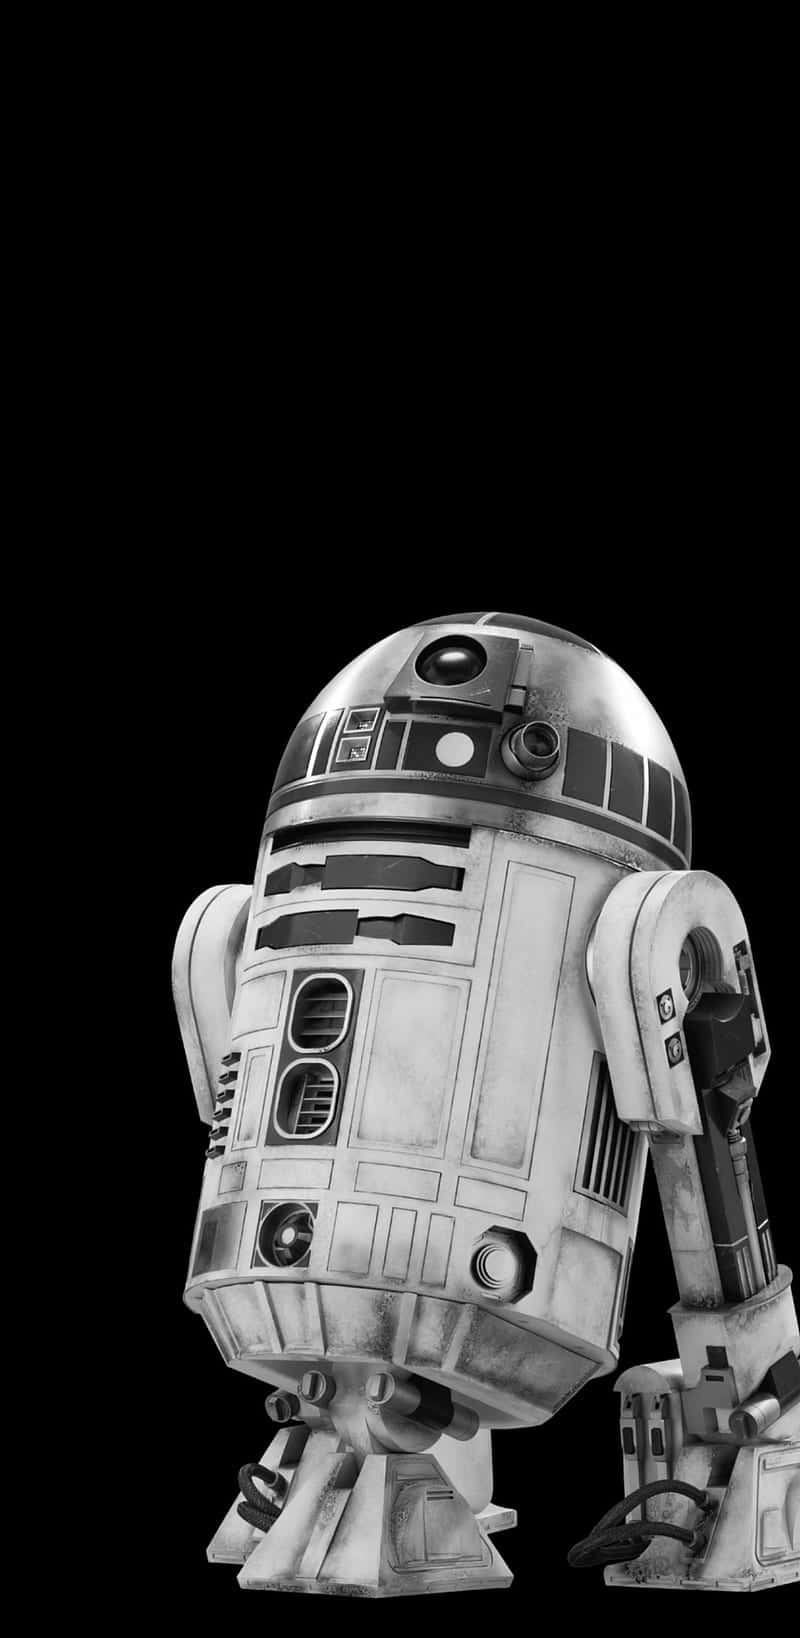 The Iconic R2-d2 Robot Character From Star Wars Background